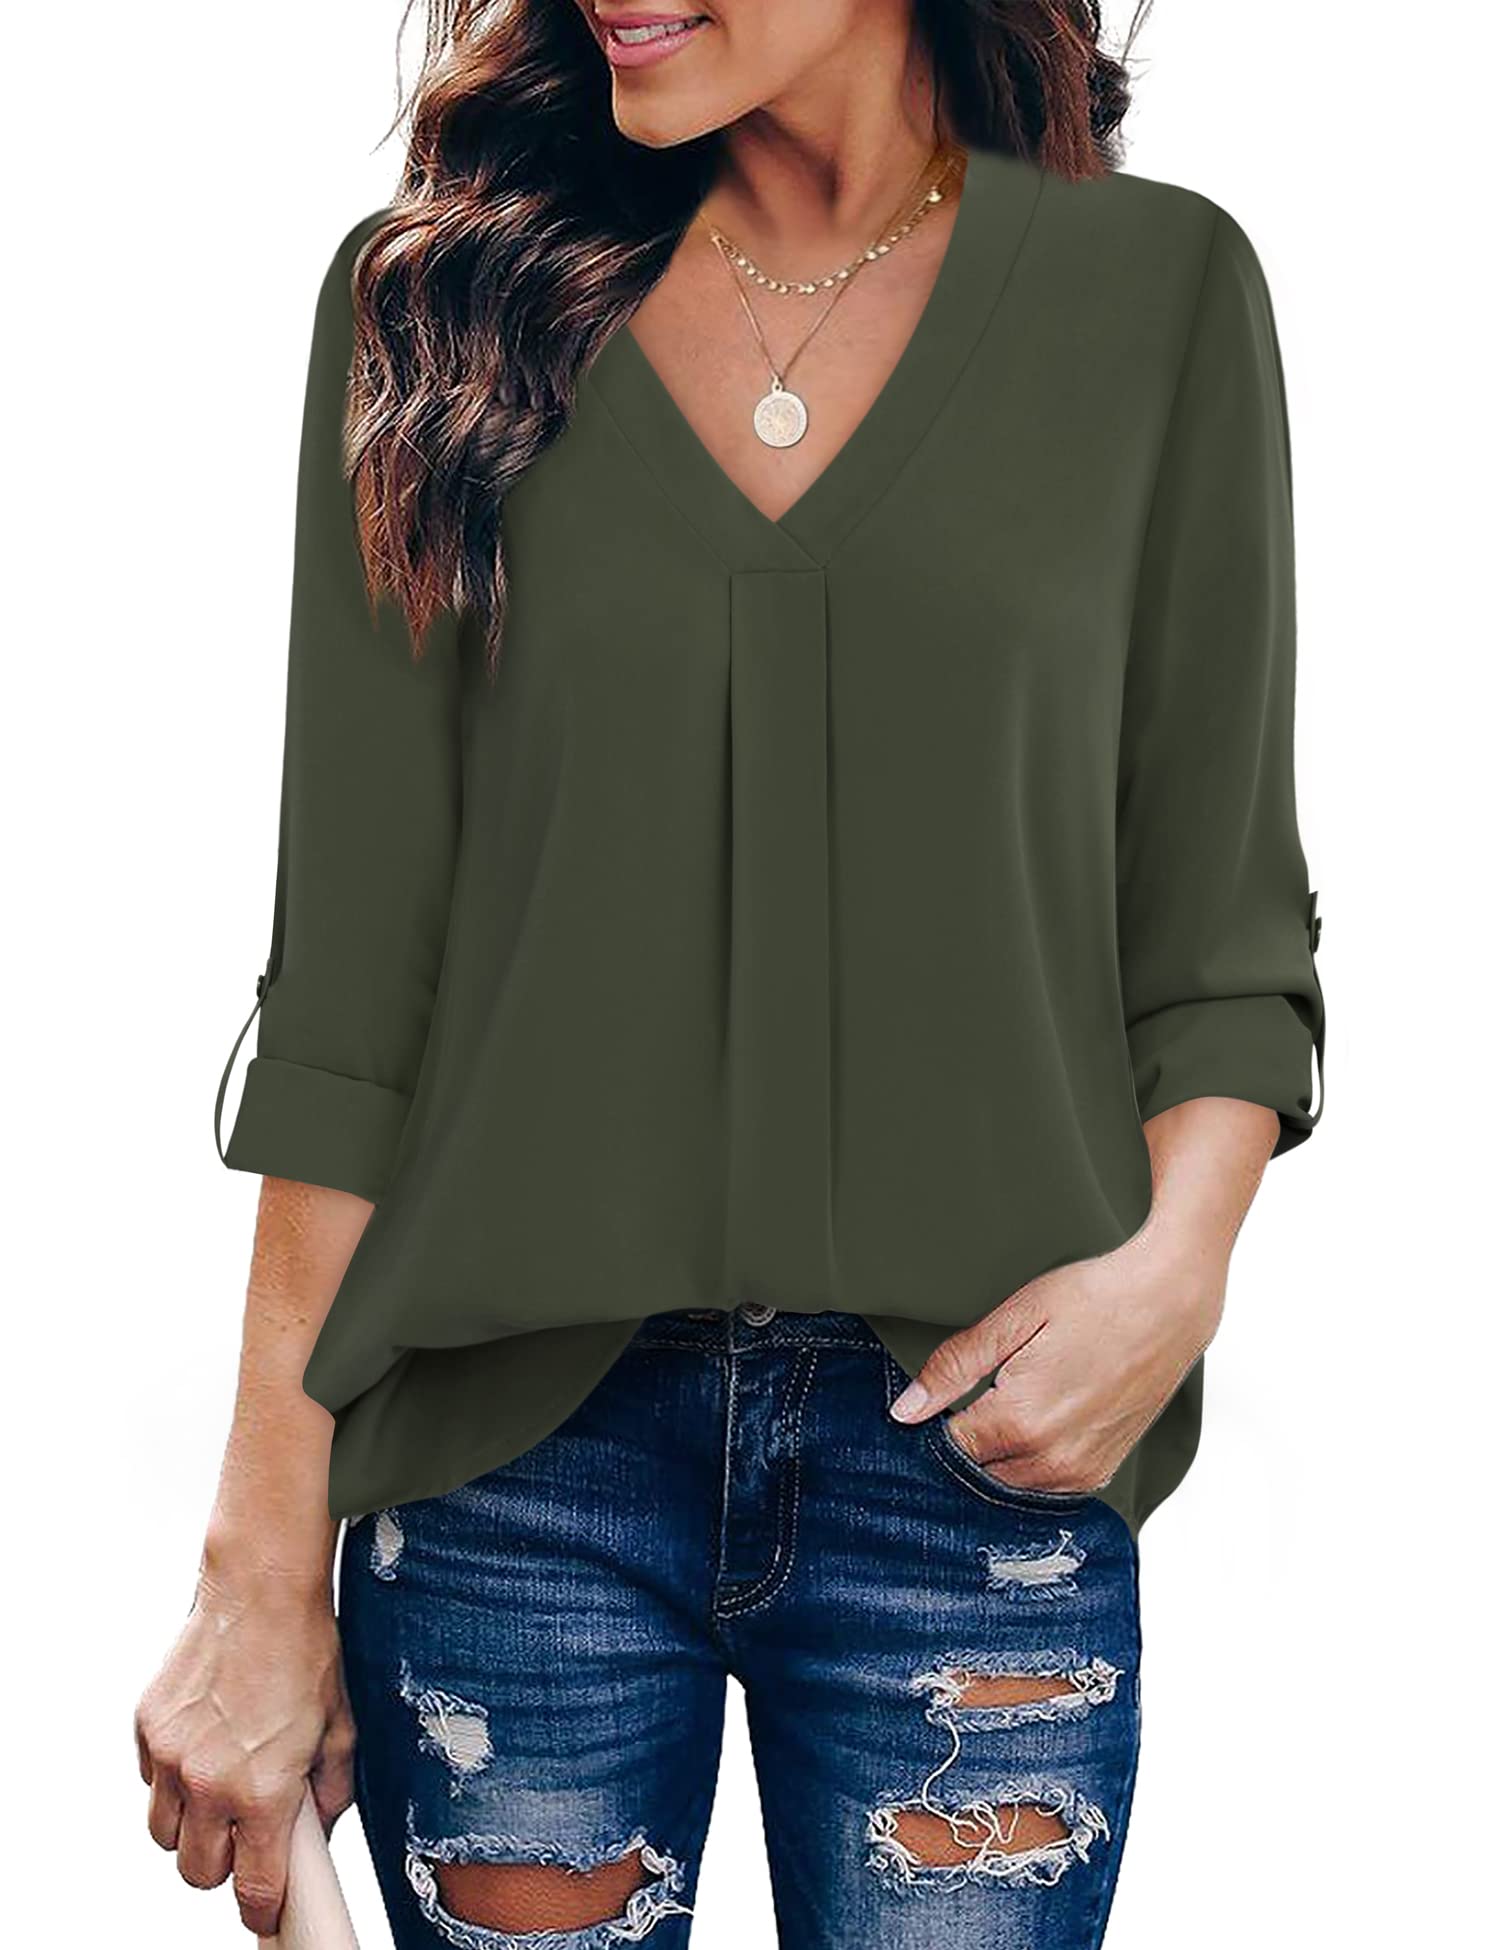 Book Cover Youtalia Womens 3/4 Cuffed Sleeve Chiffon Printed V Neck Casual Blouse Shirt Tops Small Army Green